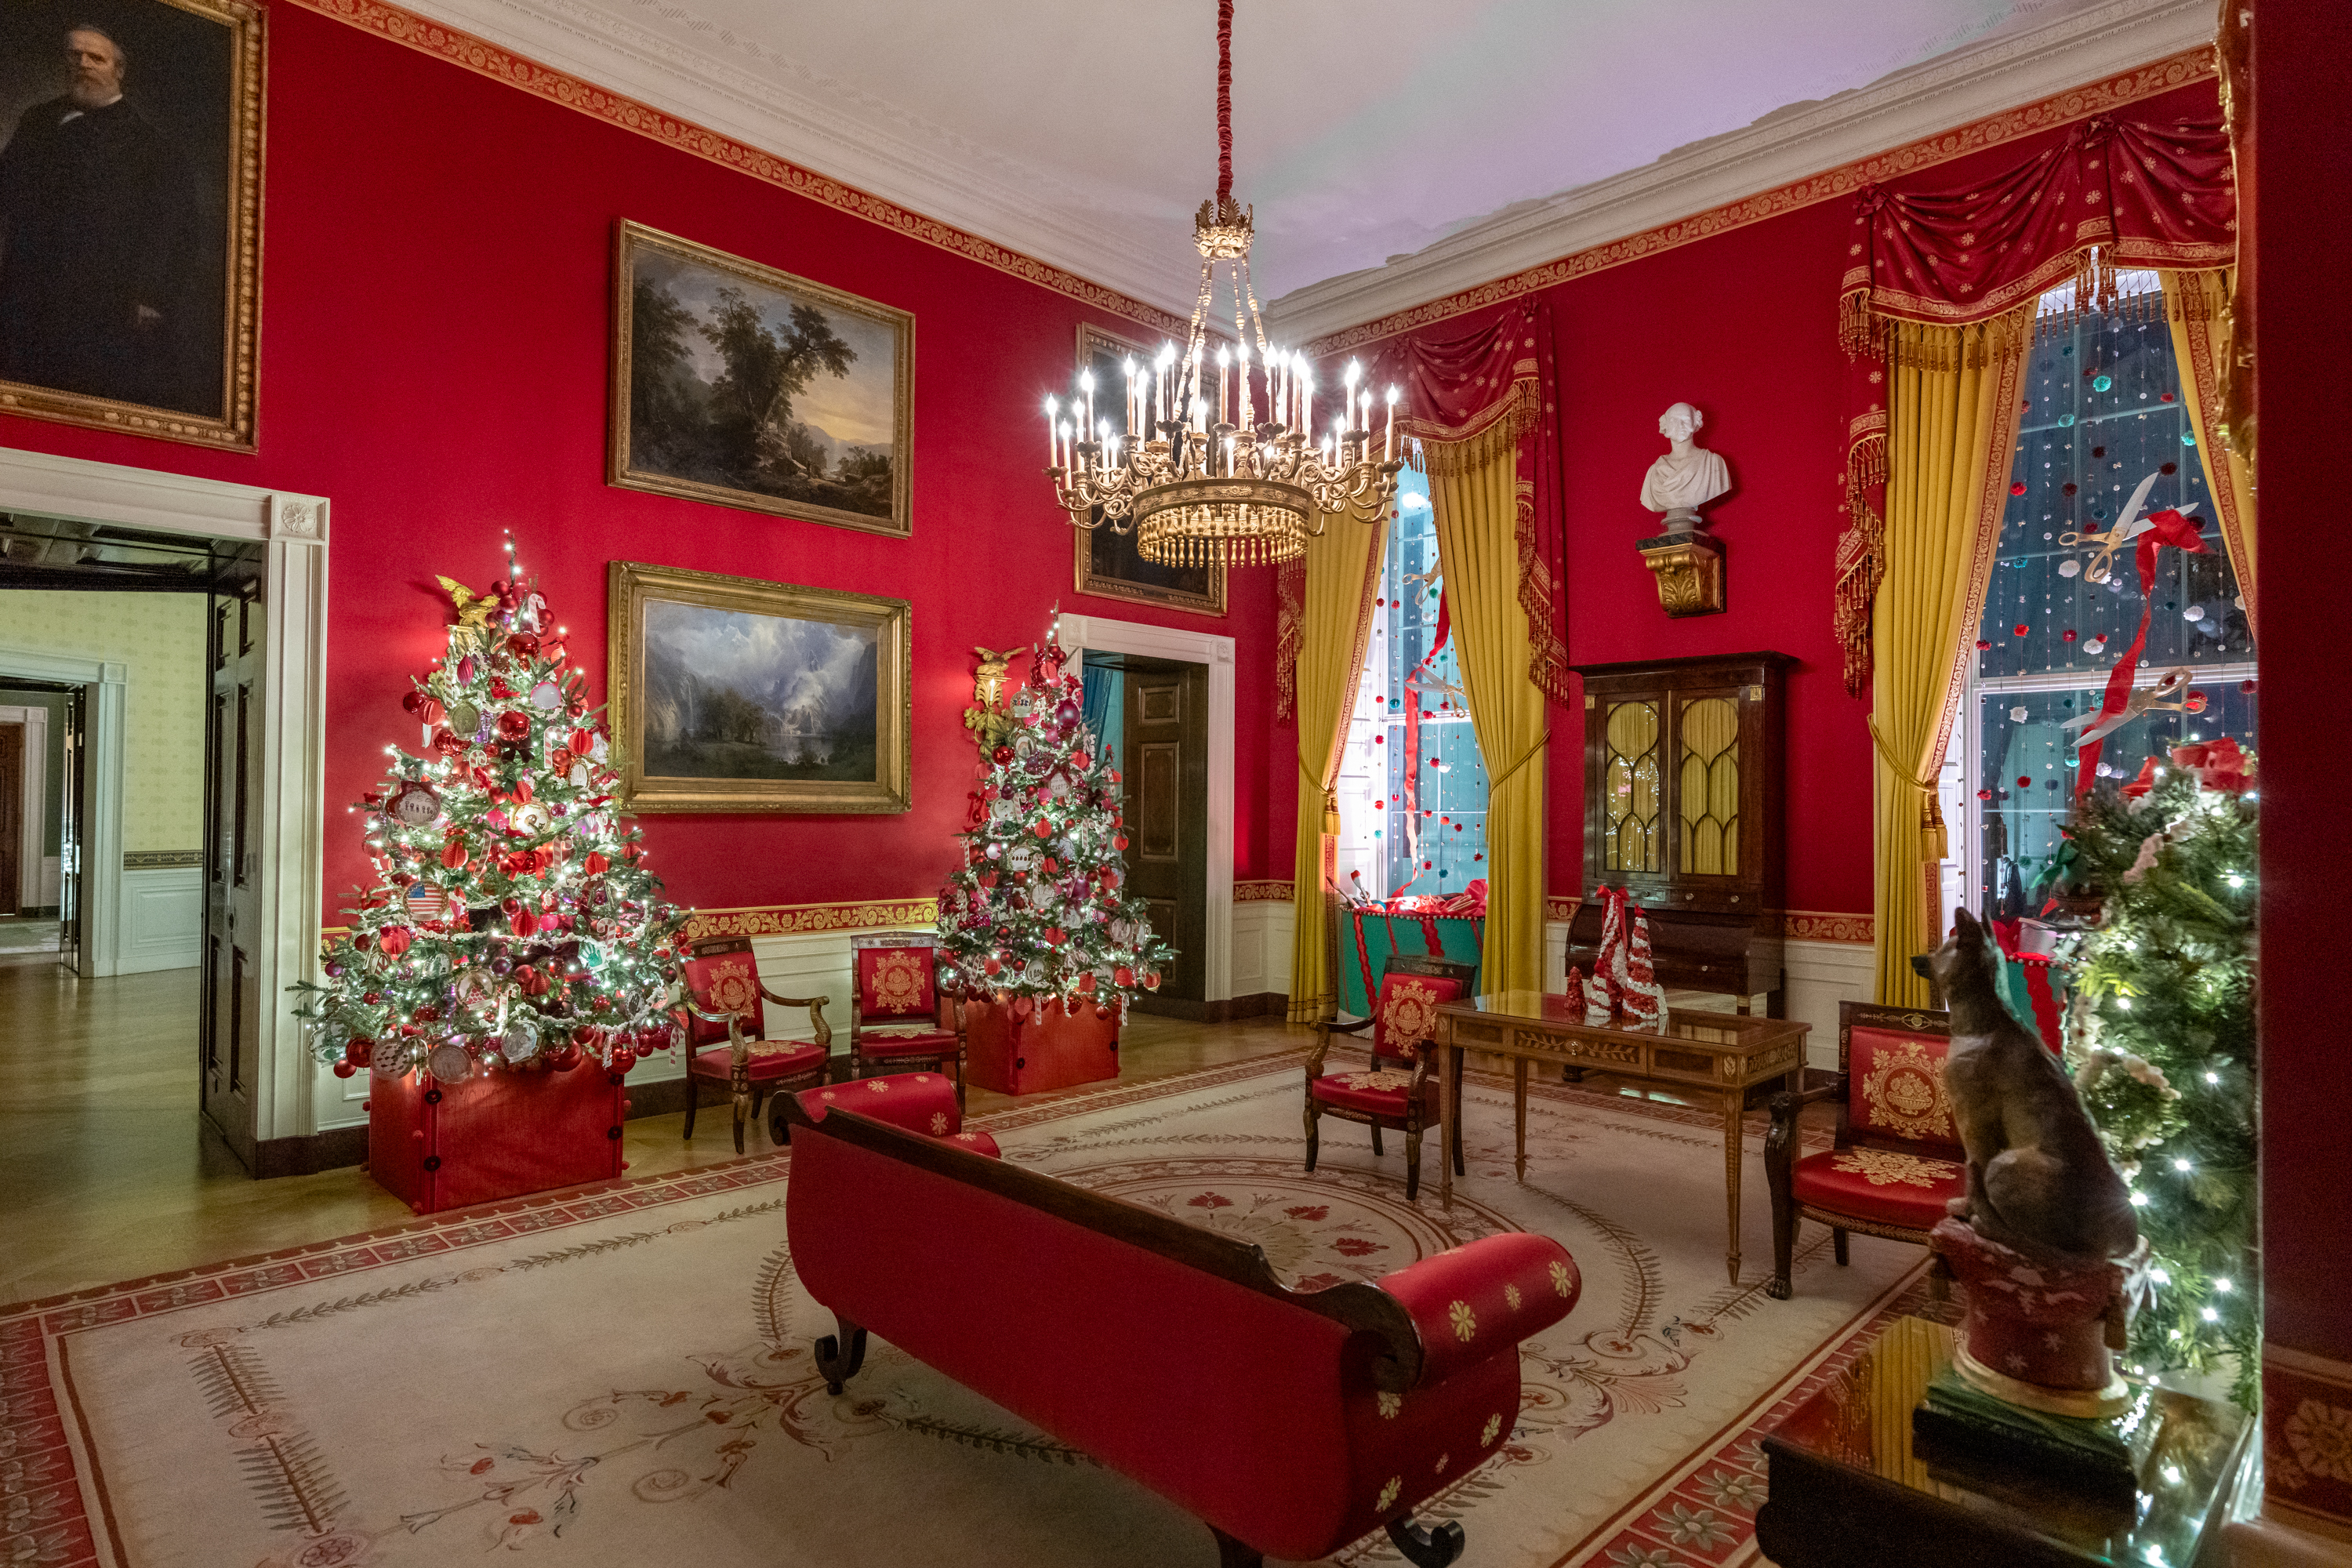 The Red Room Christmas Decorations